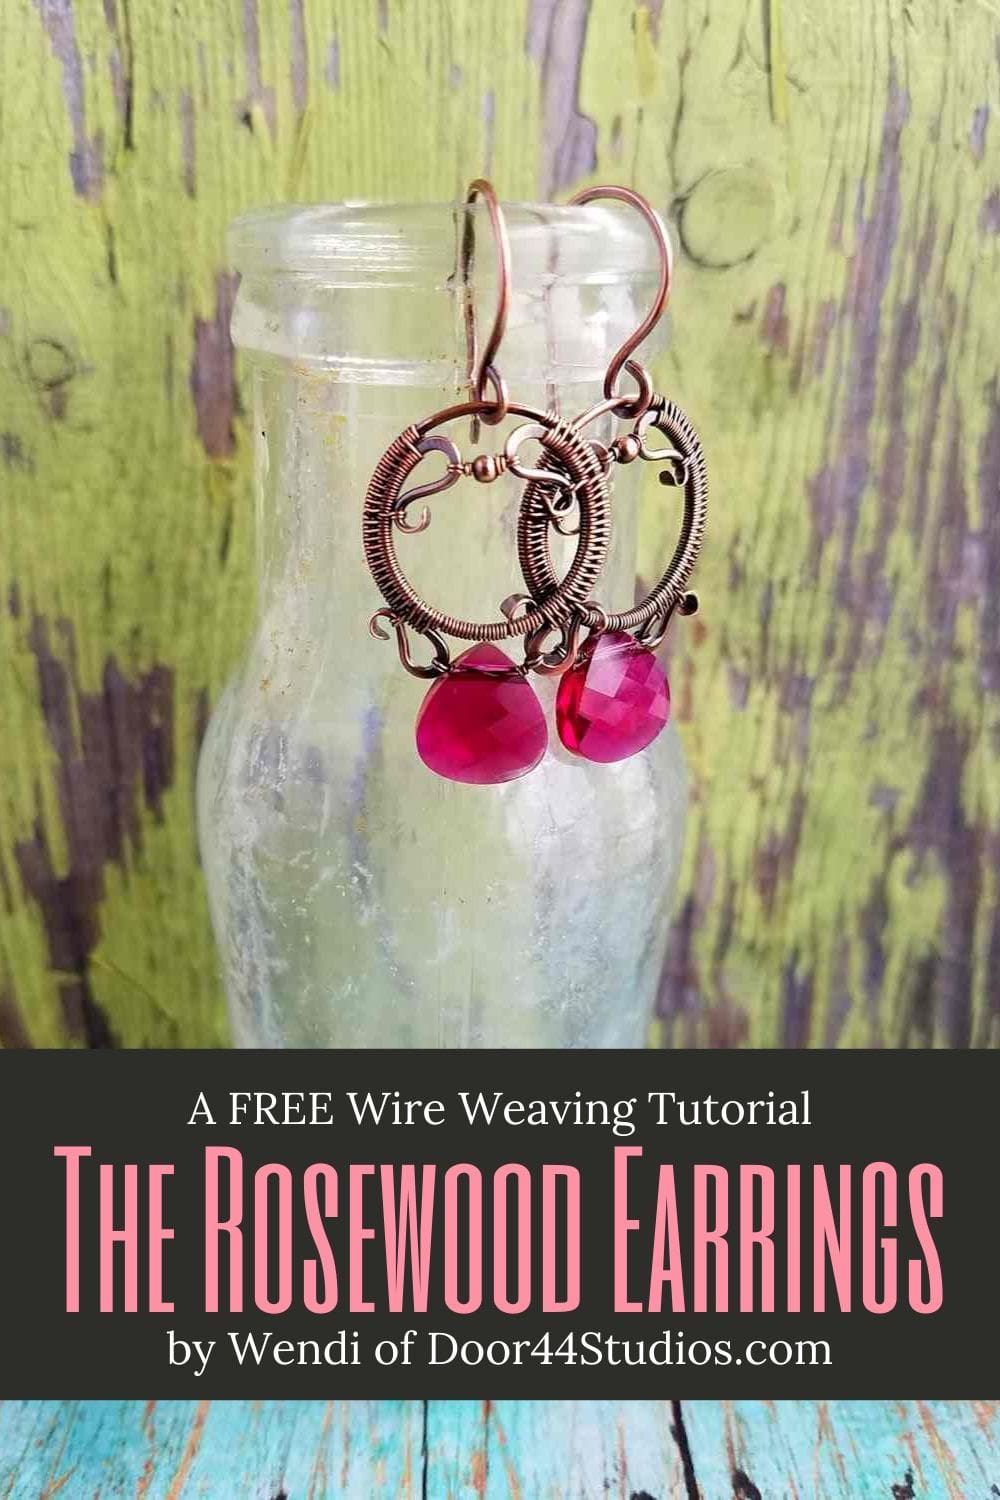 Would you like to learn the art of wire weaving? The free Rosewood Earrings tutorial is both fun and challenging for beginners. And you'll have an elegant pair of earrings to show off when you're done. 